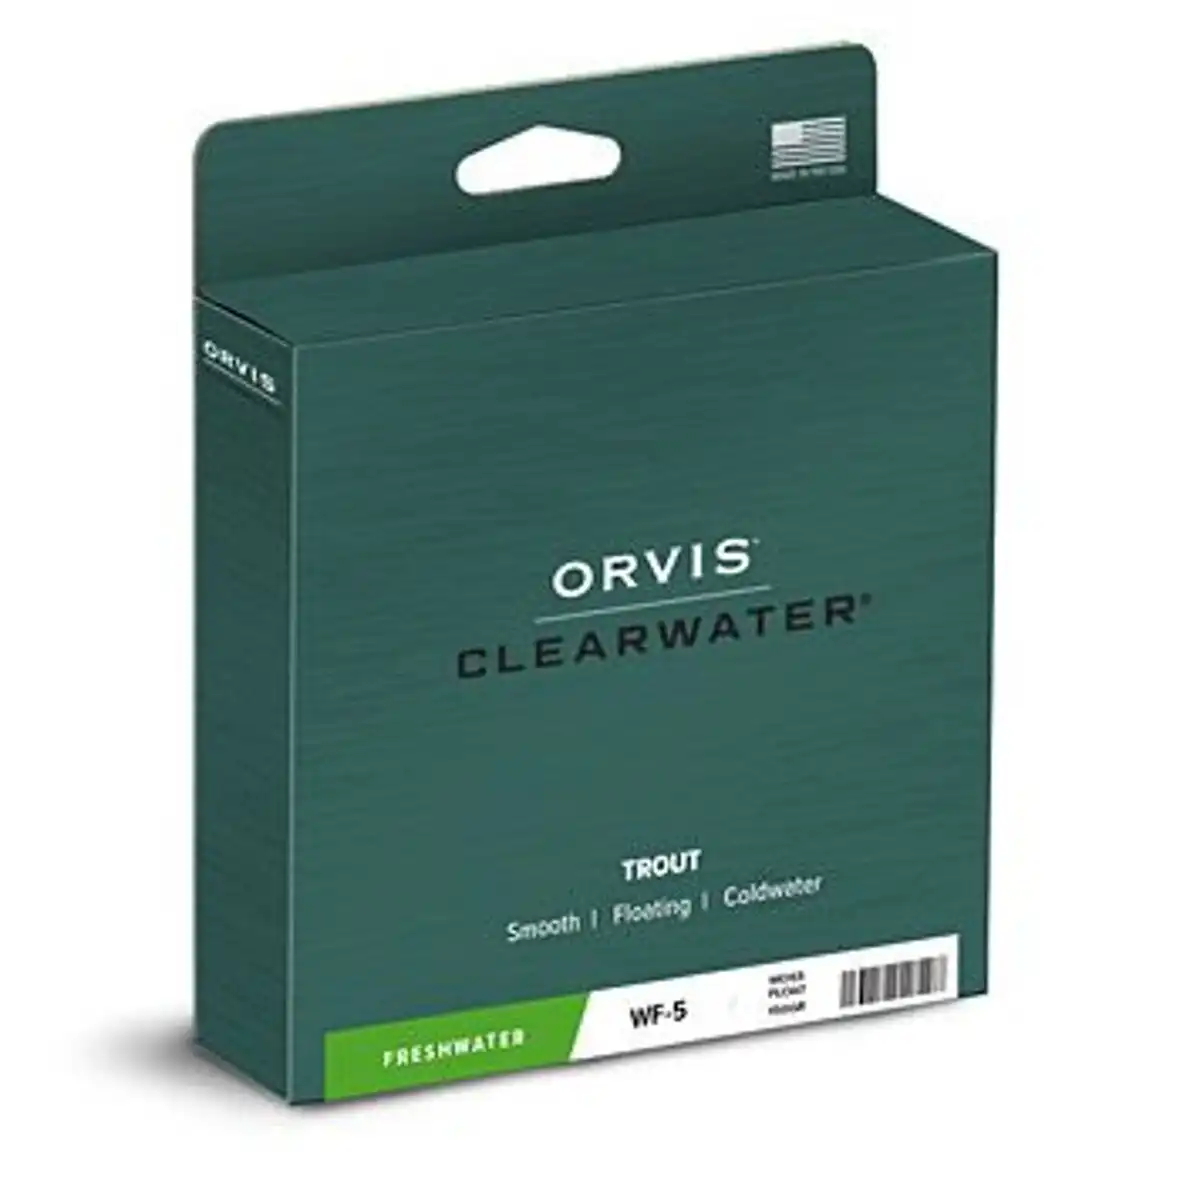 Orvis Clearwater Trout #3 schwimmend WF Moss